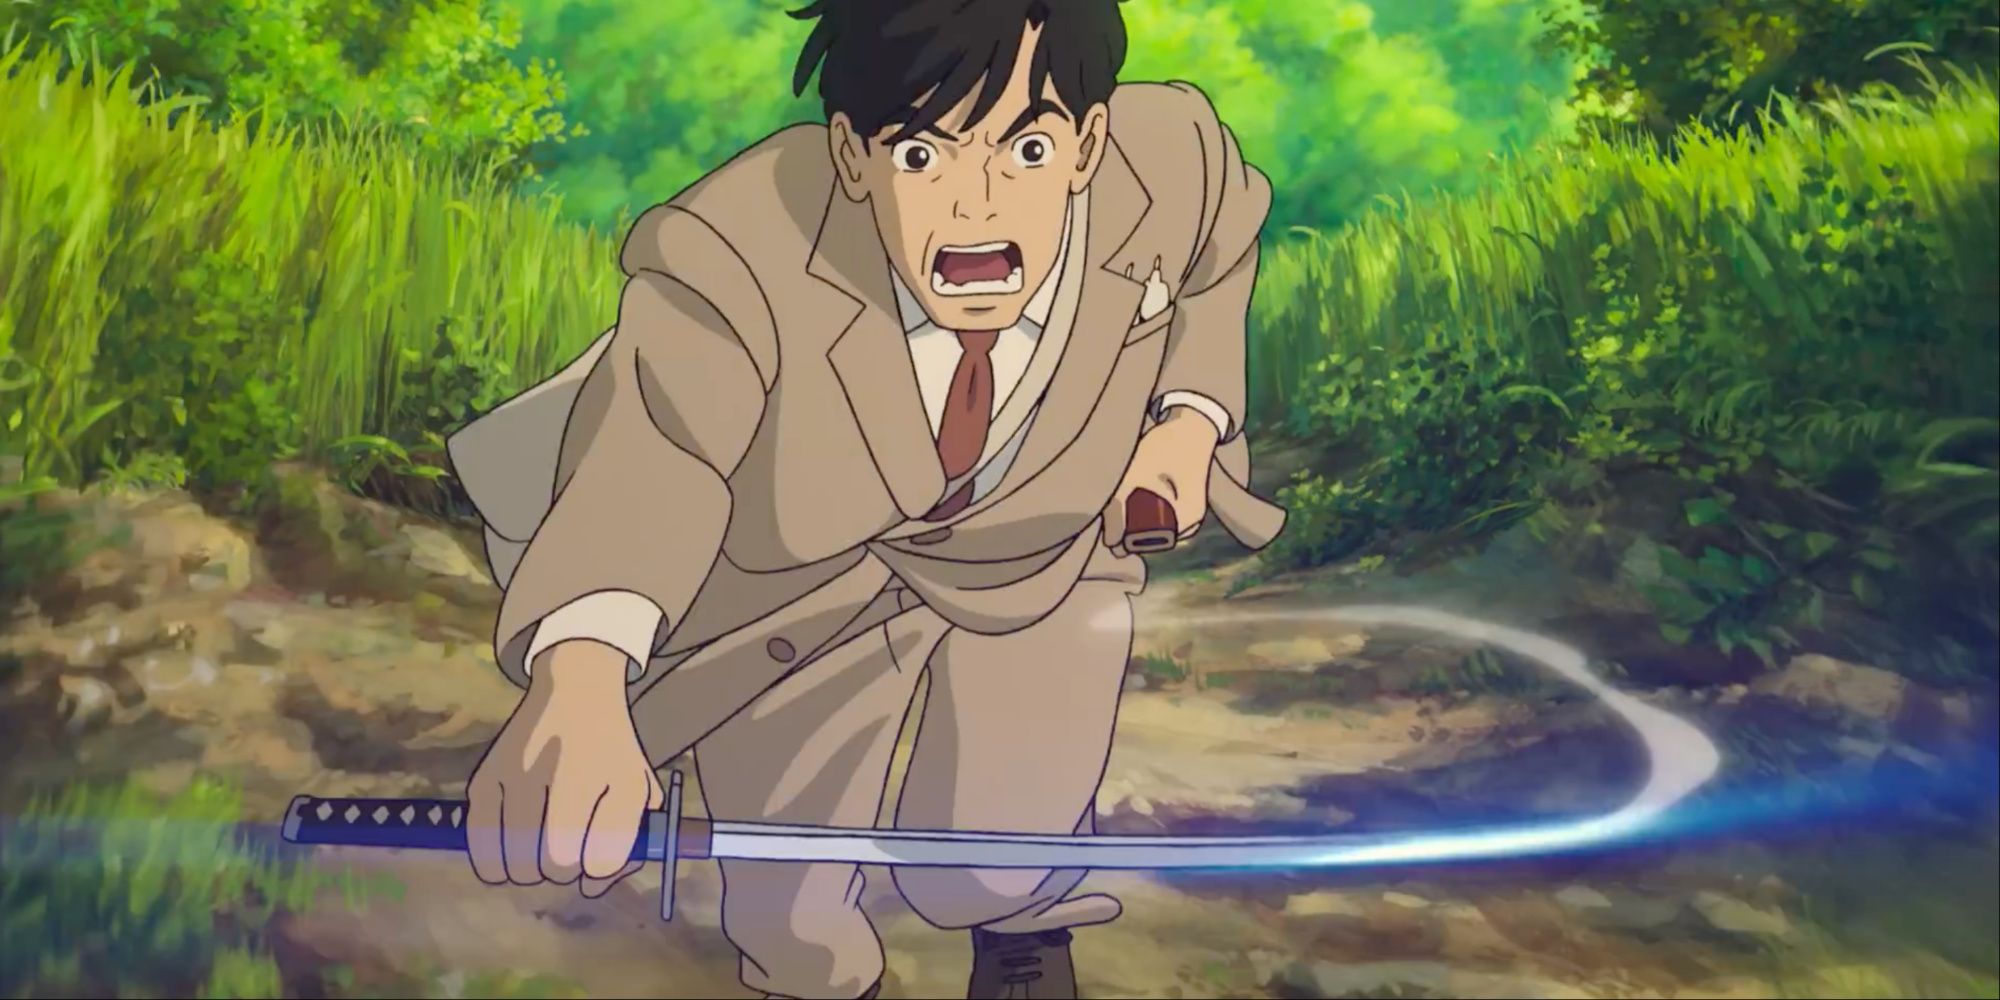 Shoichi wielding a sword in The Boy and the Heron